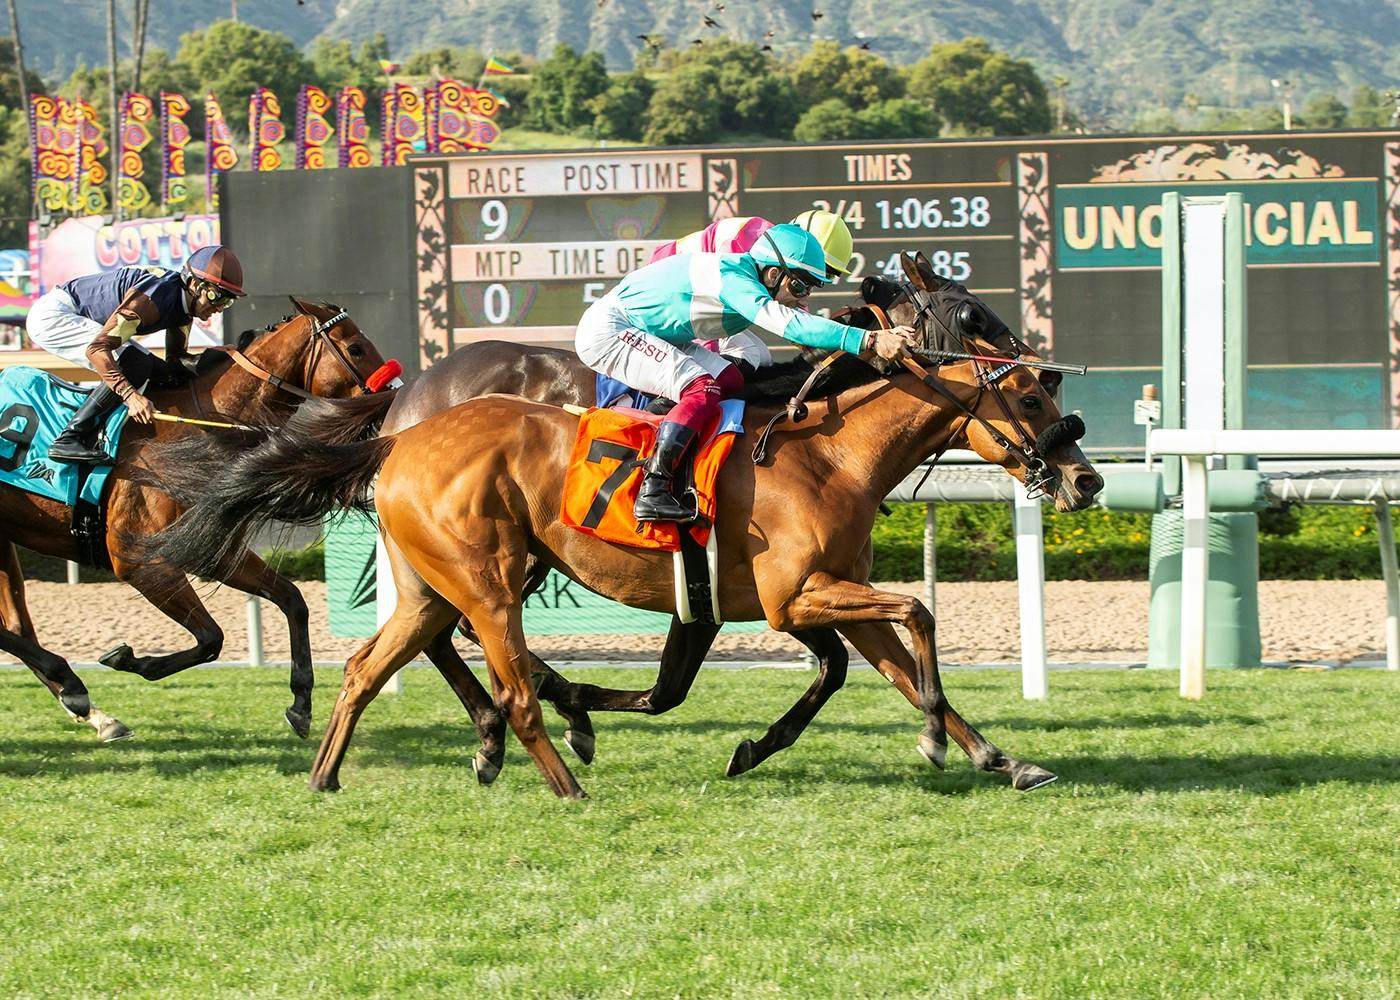 Laulne Aims For 2nd Straight Stakes Win On Hillside Turf Course In Sunday’s GIII, $100,000 Senorita Stakes